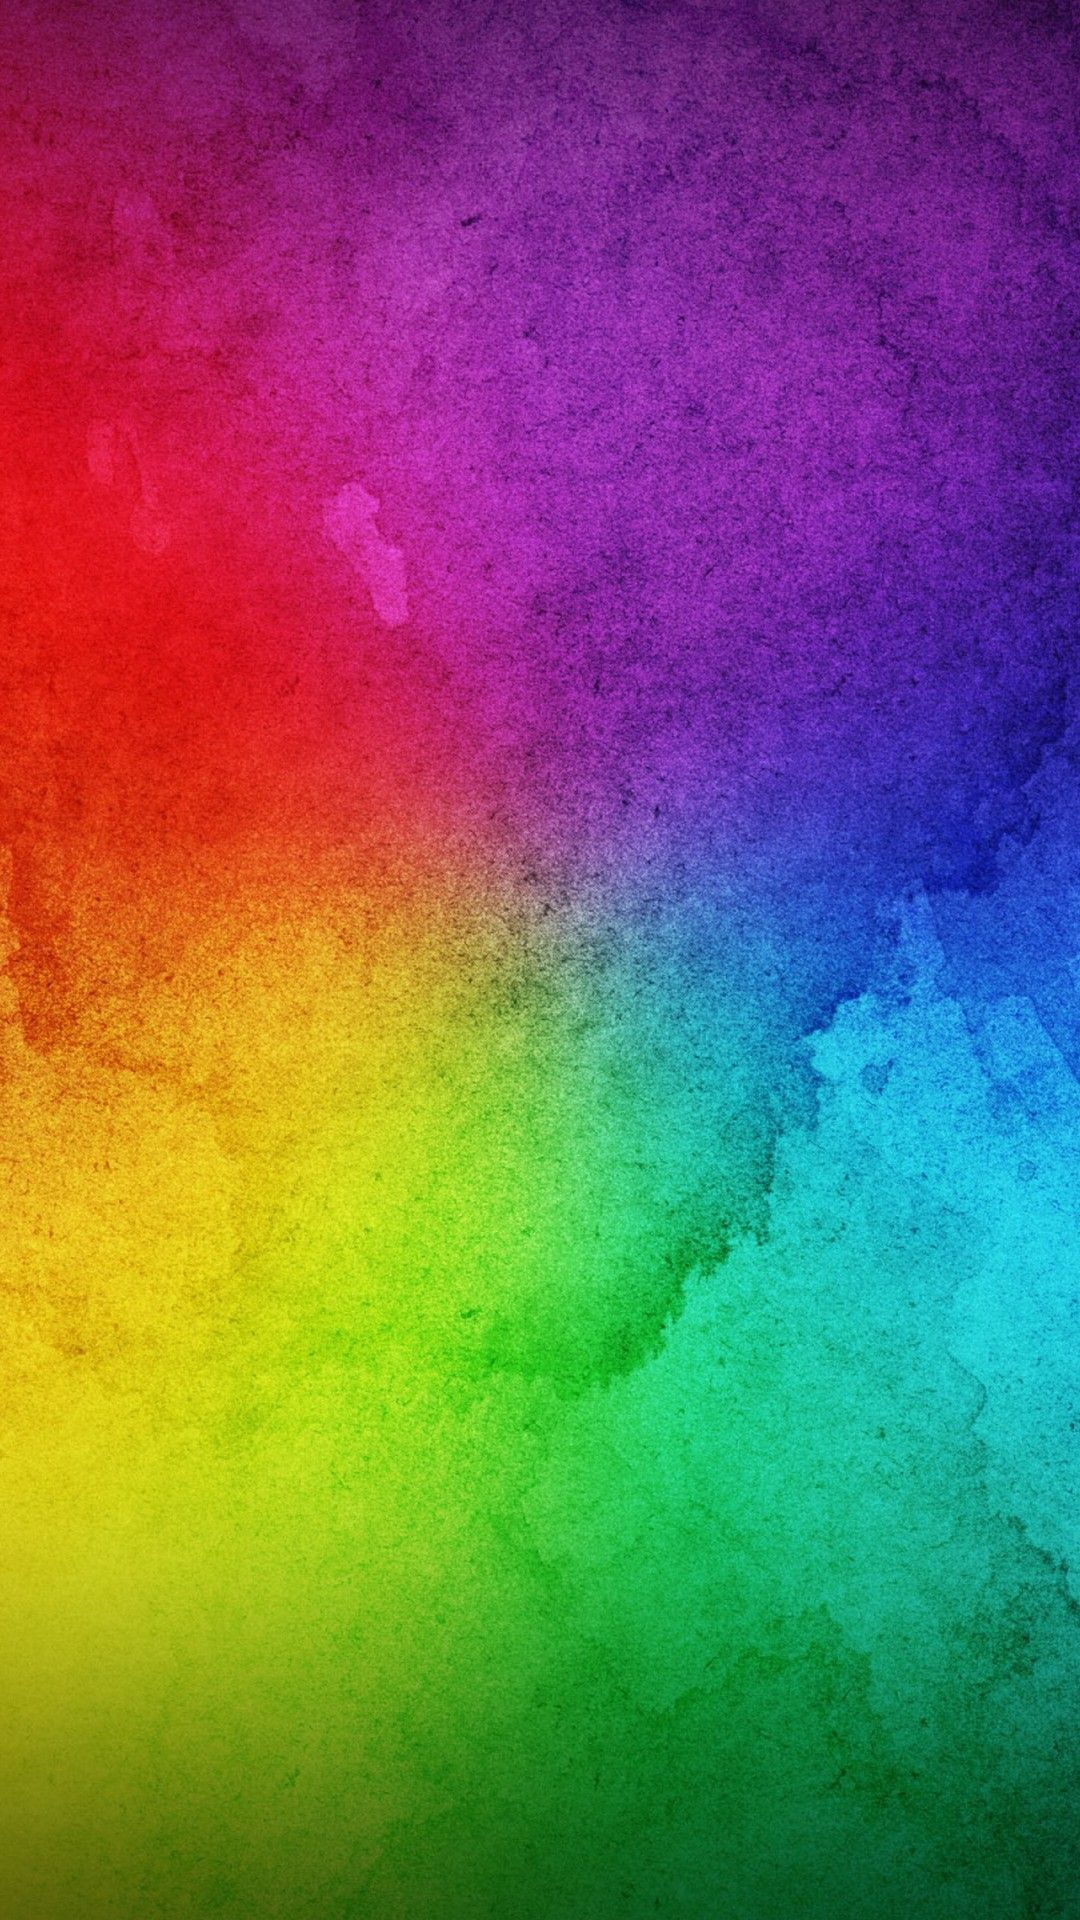 1080x1920 Android Wallpaper Rainbow Colors Best Mobile Wallpaper | Papel de parede colorido, Wallpaper rainbow, Wallpaper florid